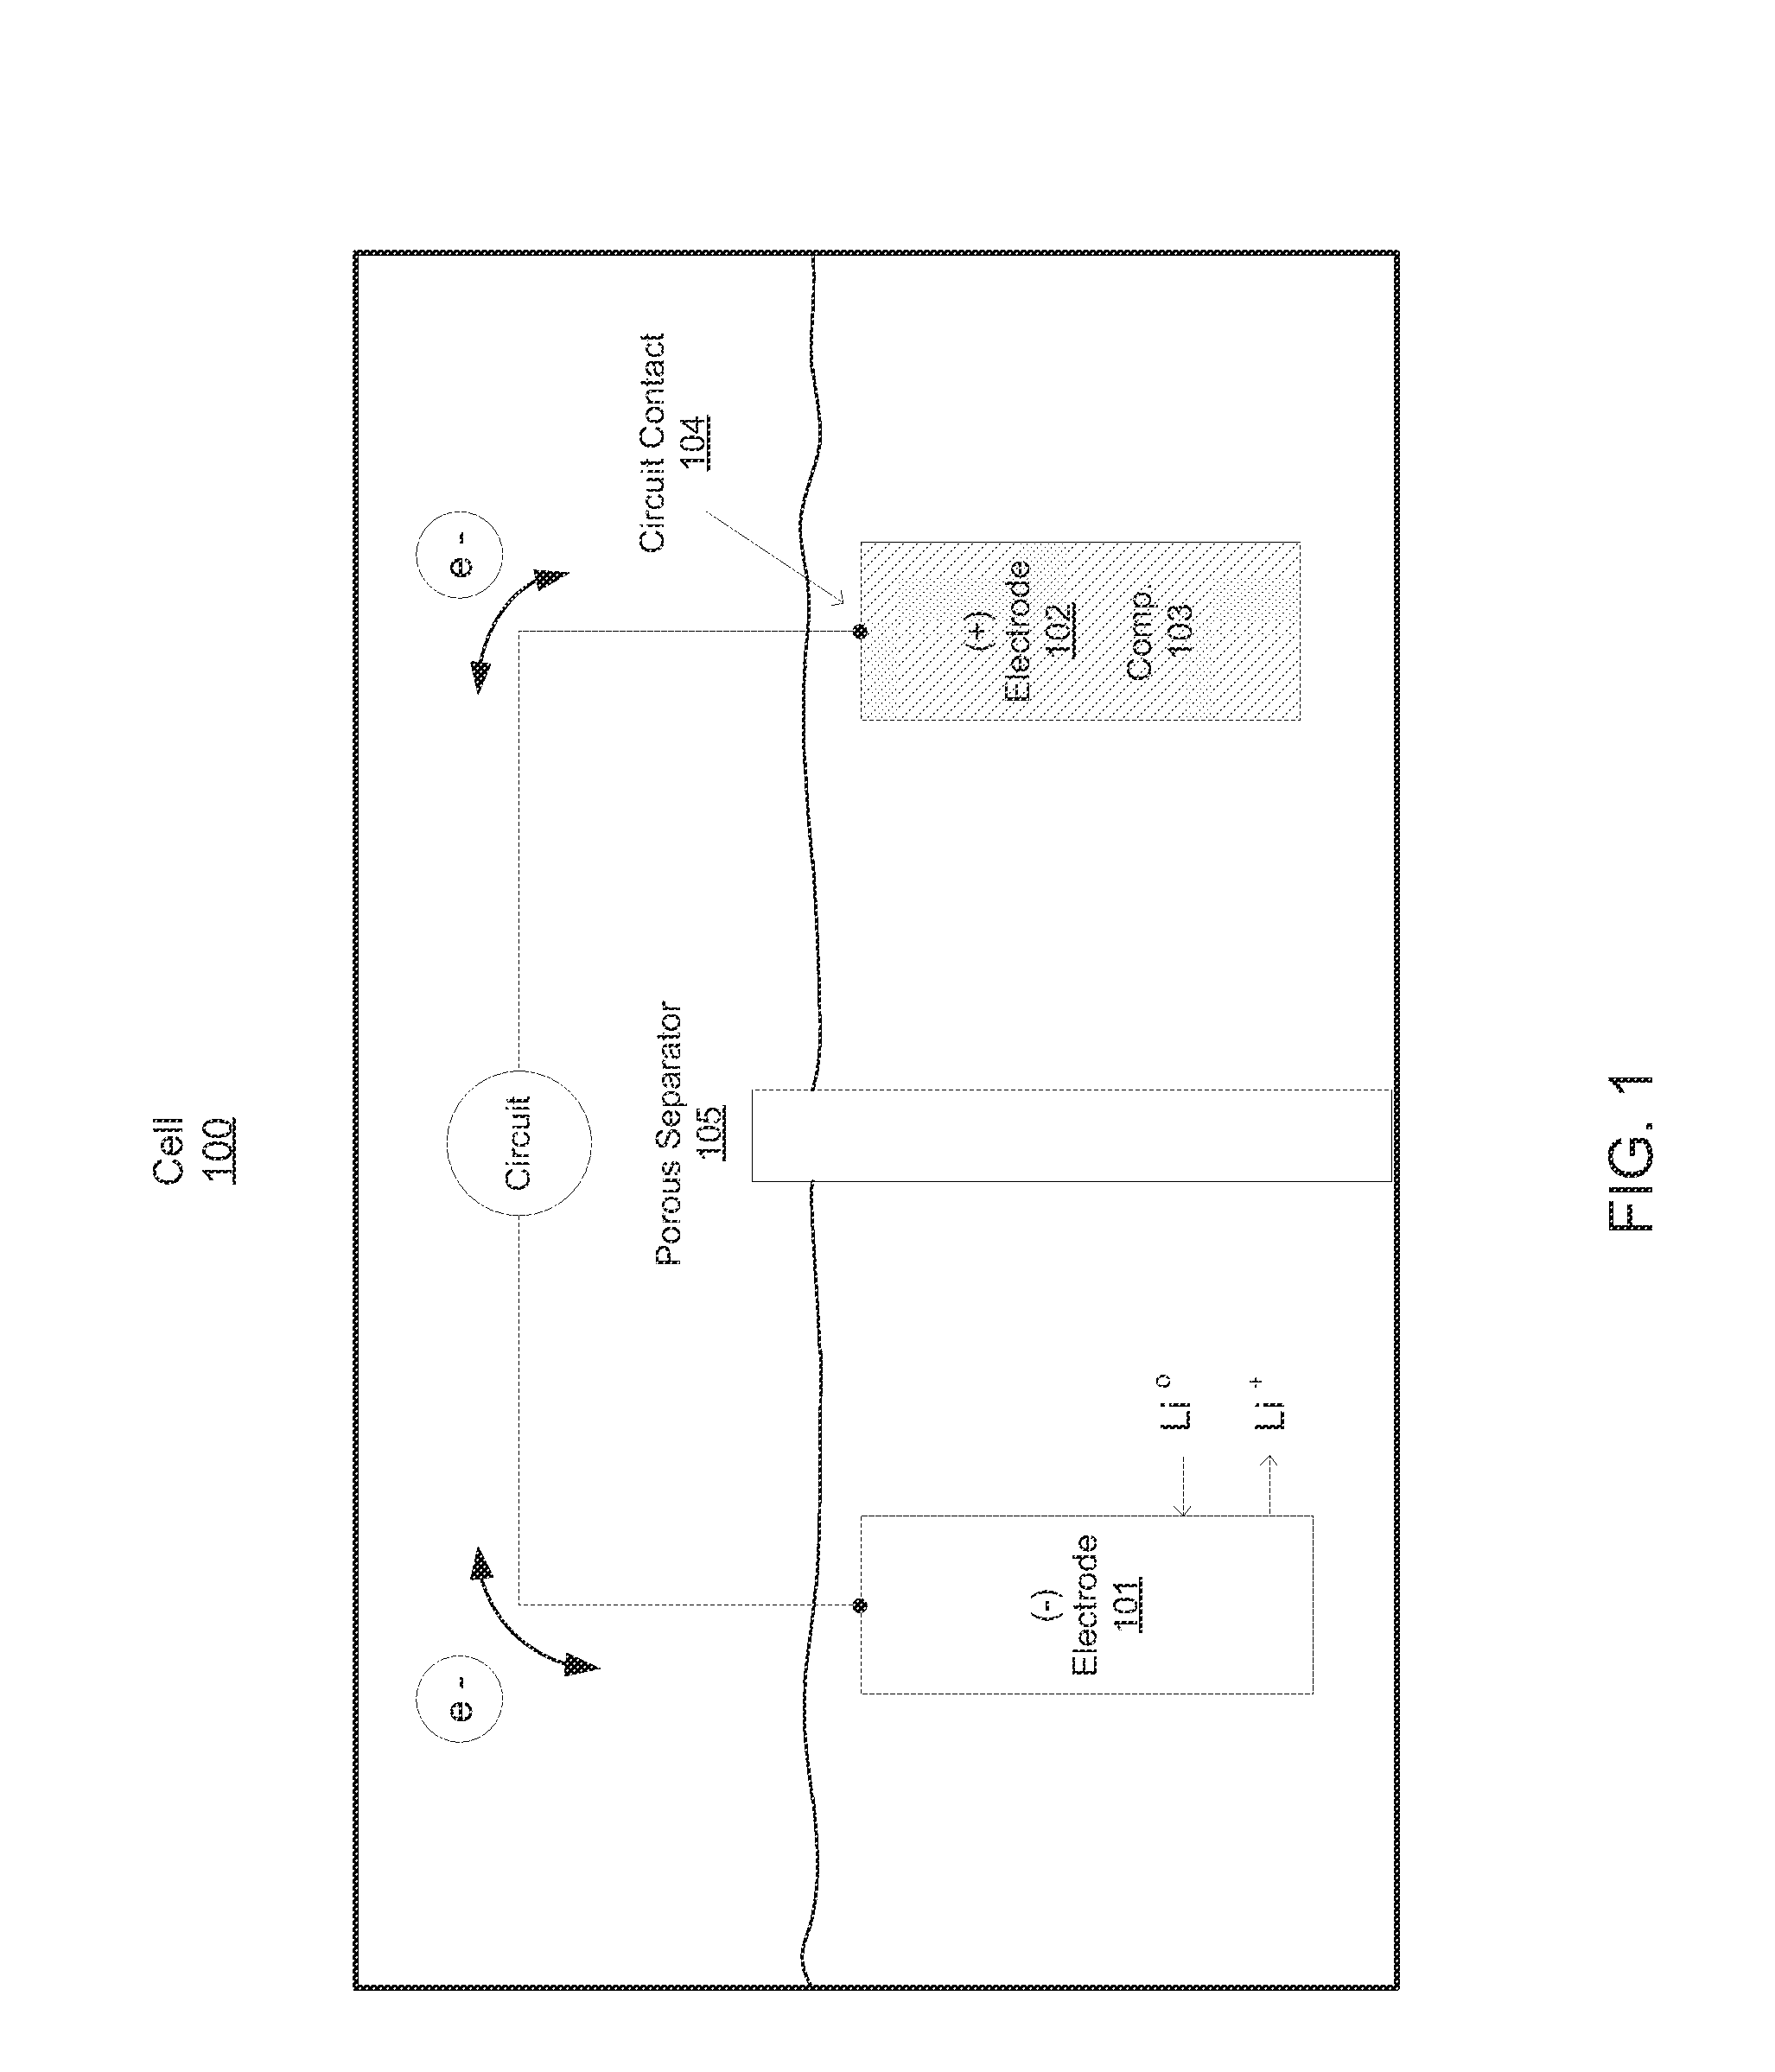 Compositions, layerings, electrodes and methods for making